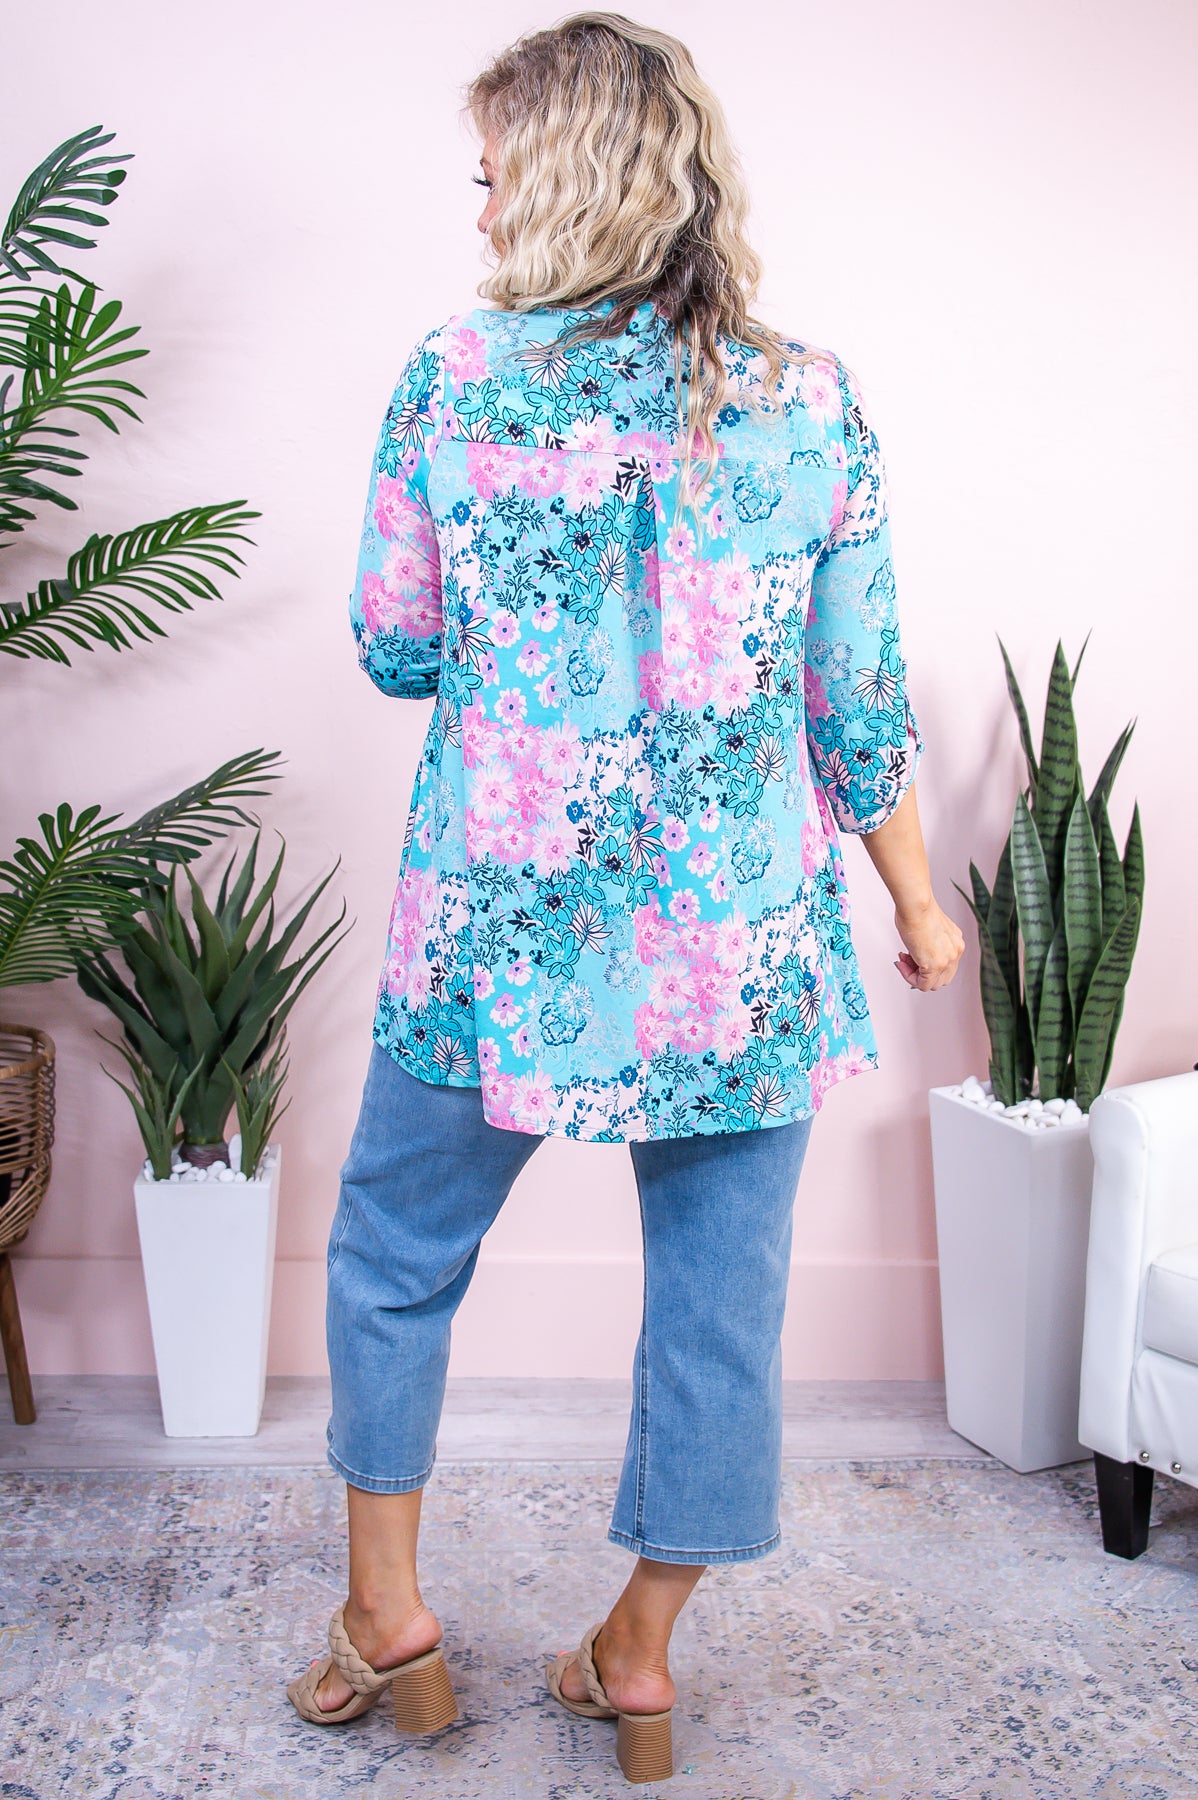 Show Stopping Light Blue/Multi Color Floral Cardigan - O5429LBL